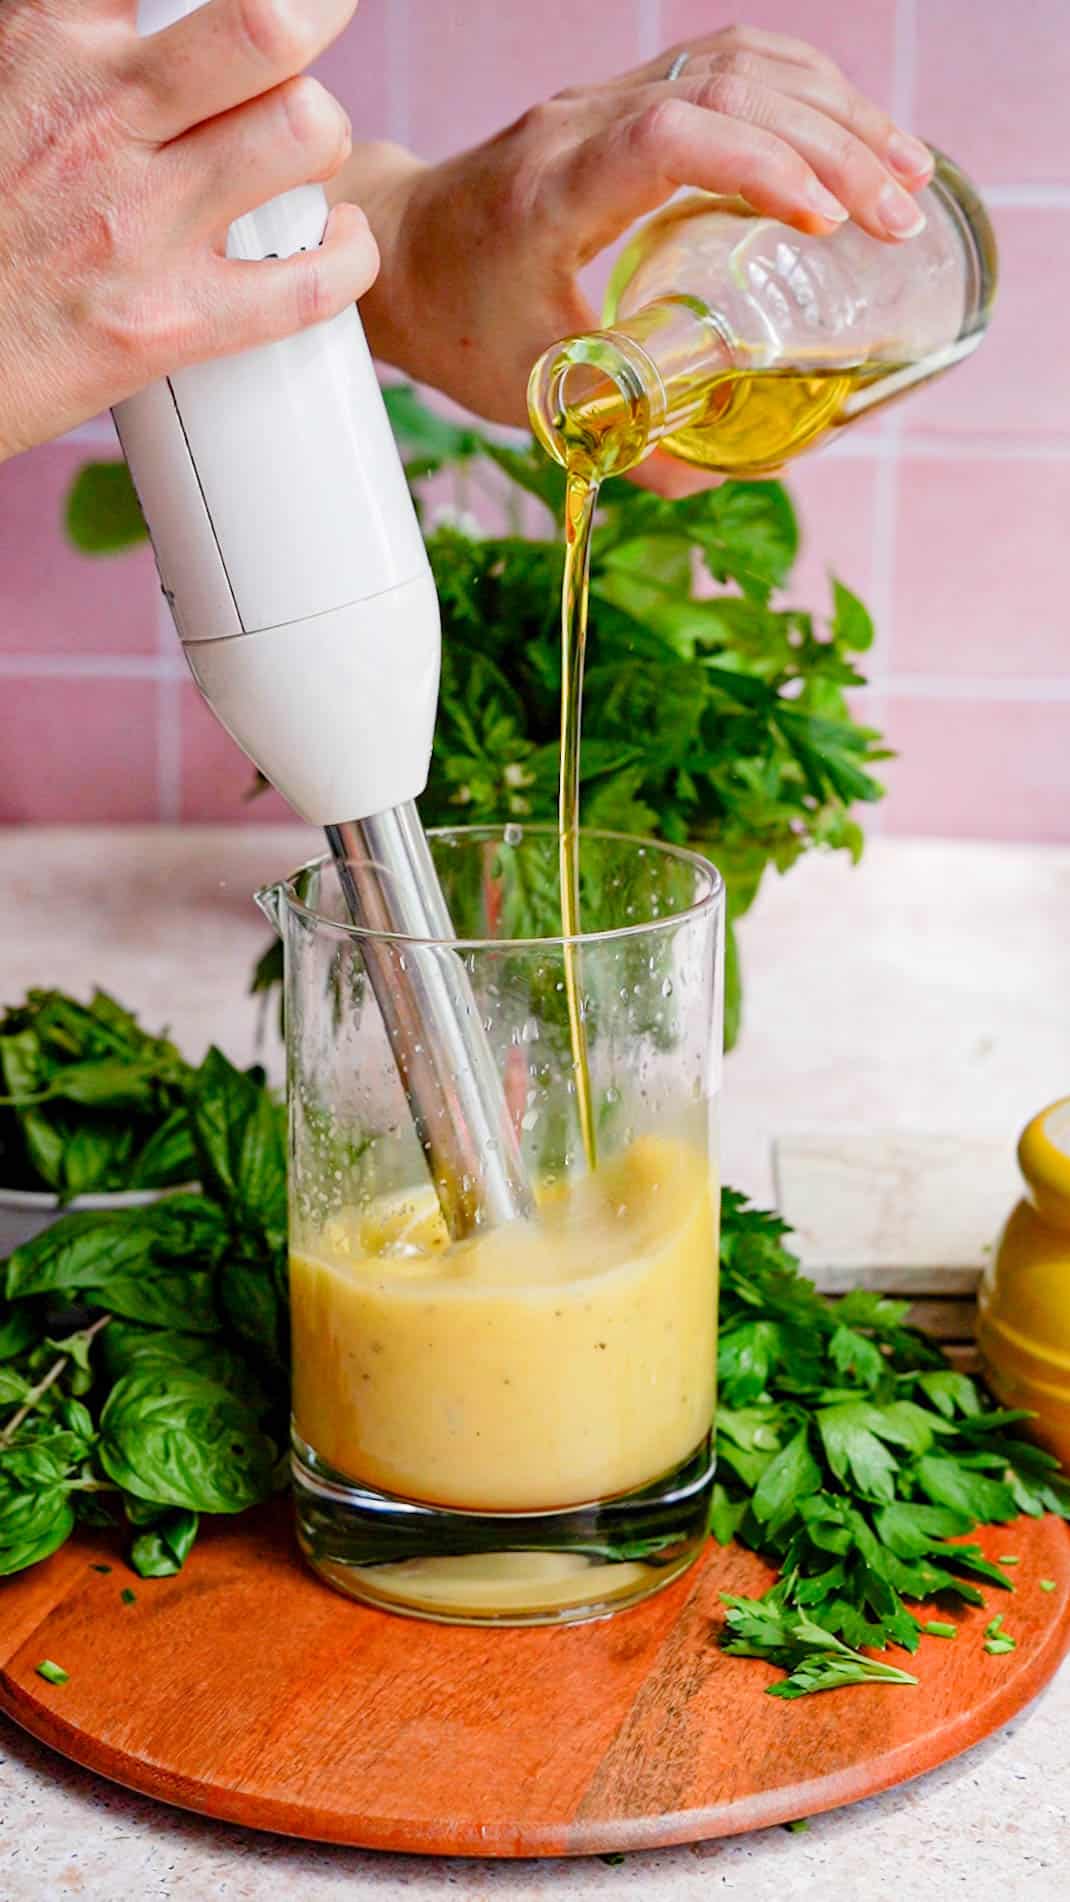 olive oil is being drizzled into a mixing jar with an immersion blender running, as a step in a recipe for a vinaigrette salad dressing.